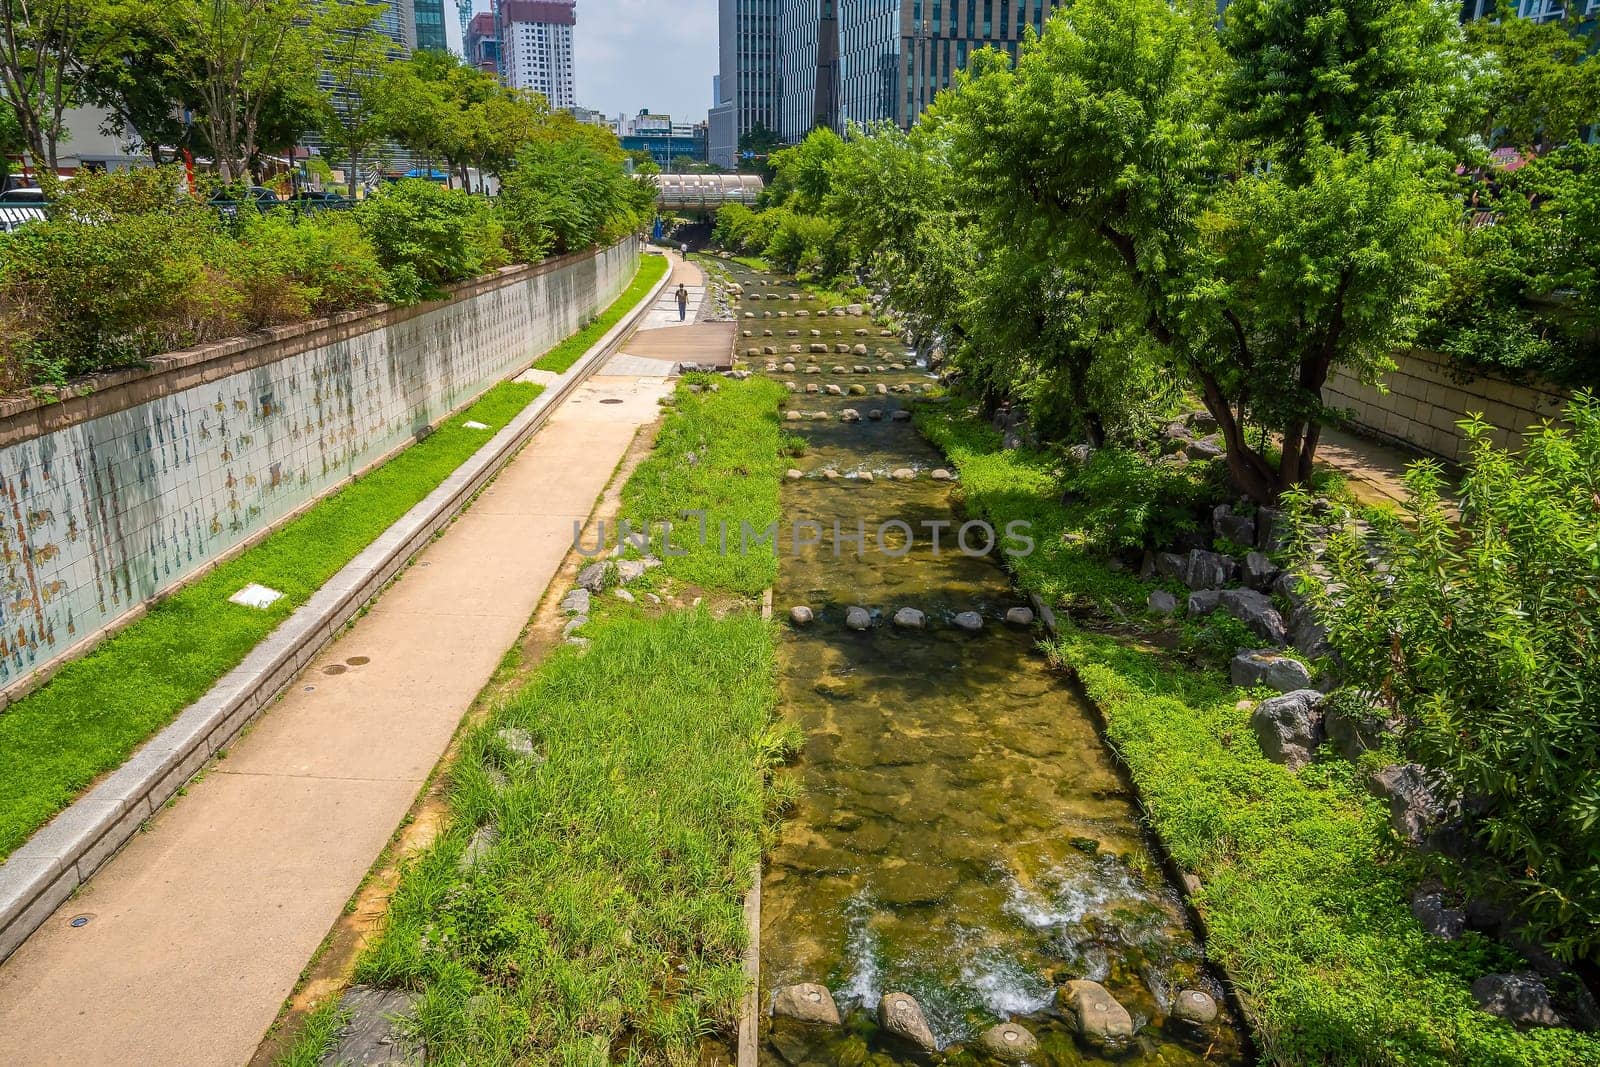 Cheonggyecheon, a modern public recreation space in downtown Seoul, South Korea by f11photo